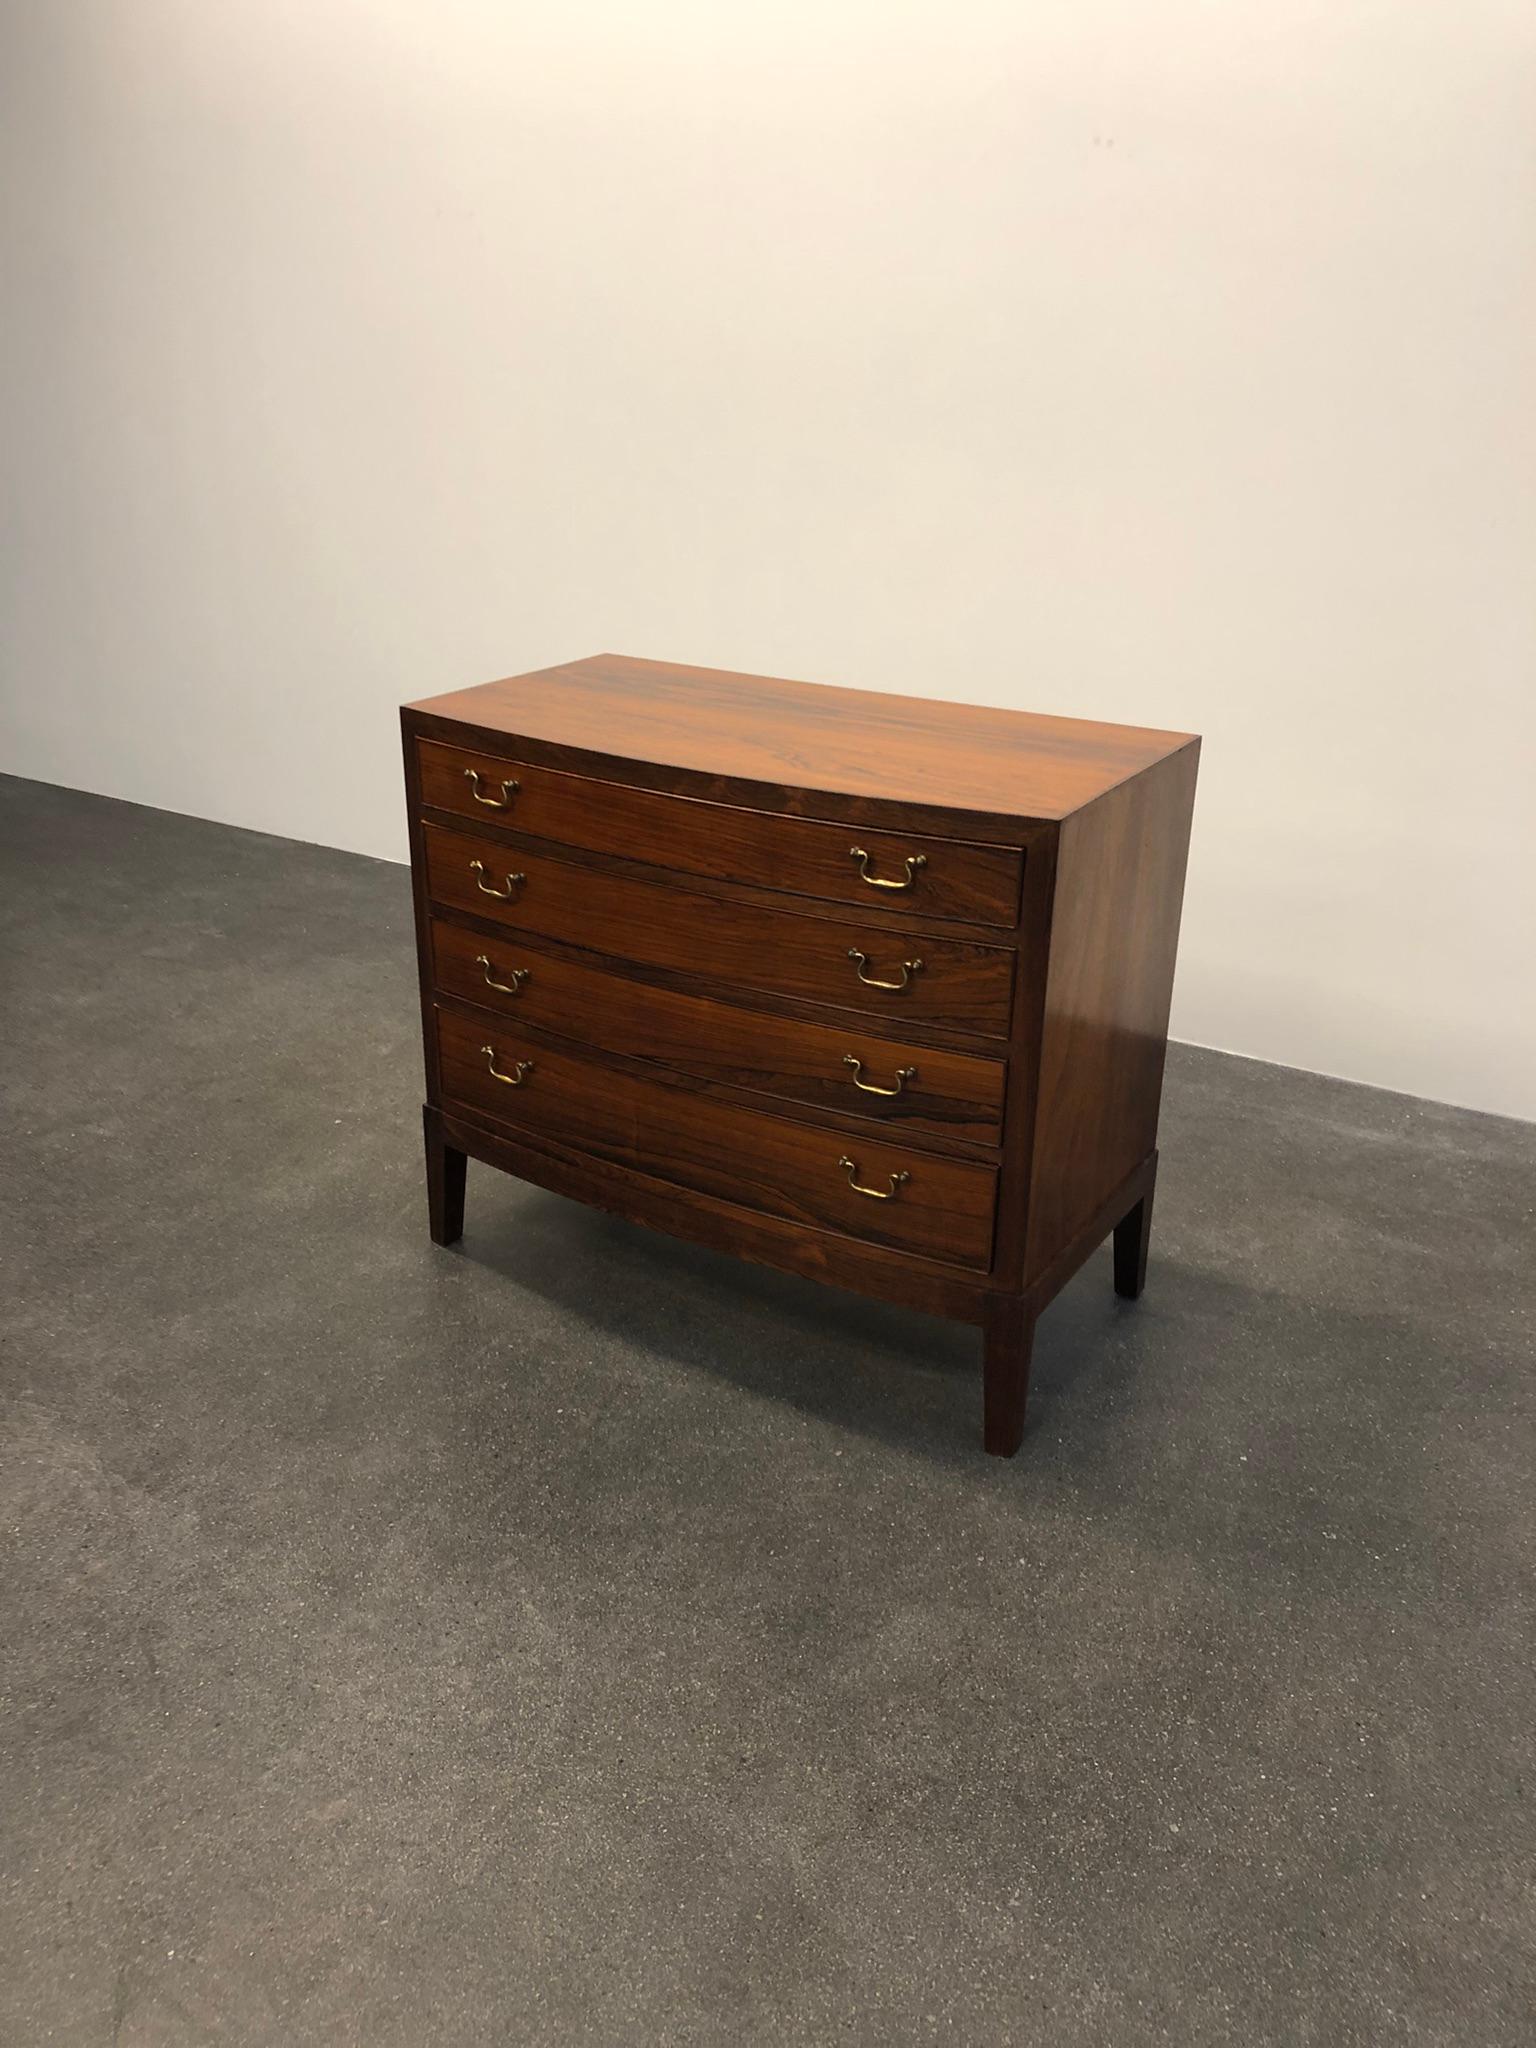 Brass Ole Wanscher Chest of Drawers in Rosewood for Cabinetmaker A. J. Iversen For Sale